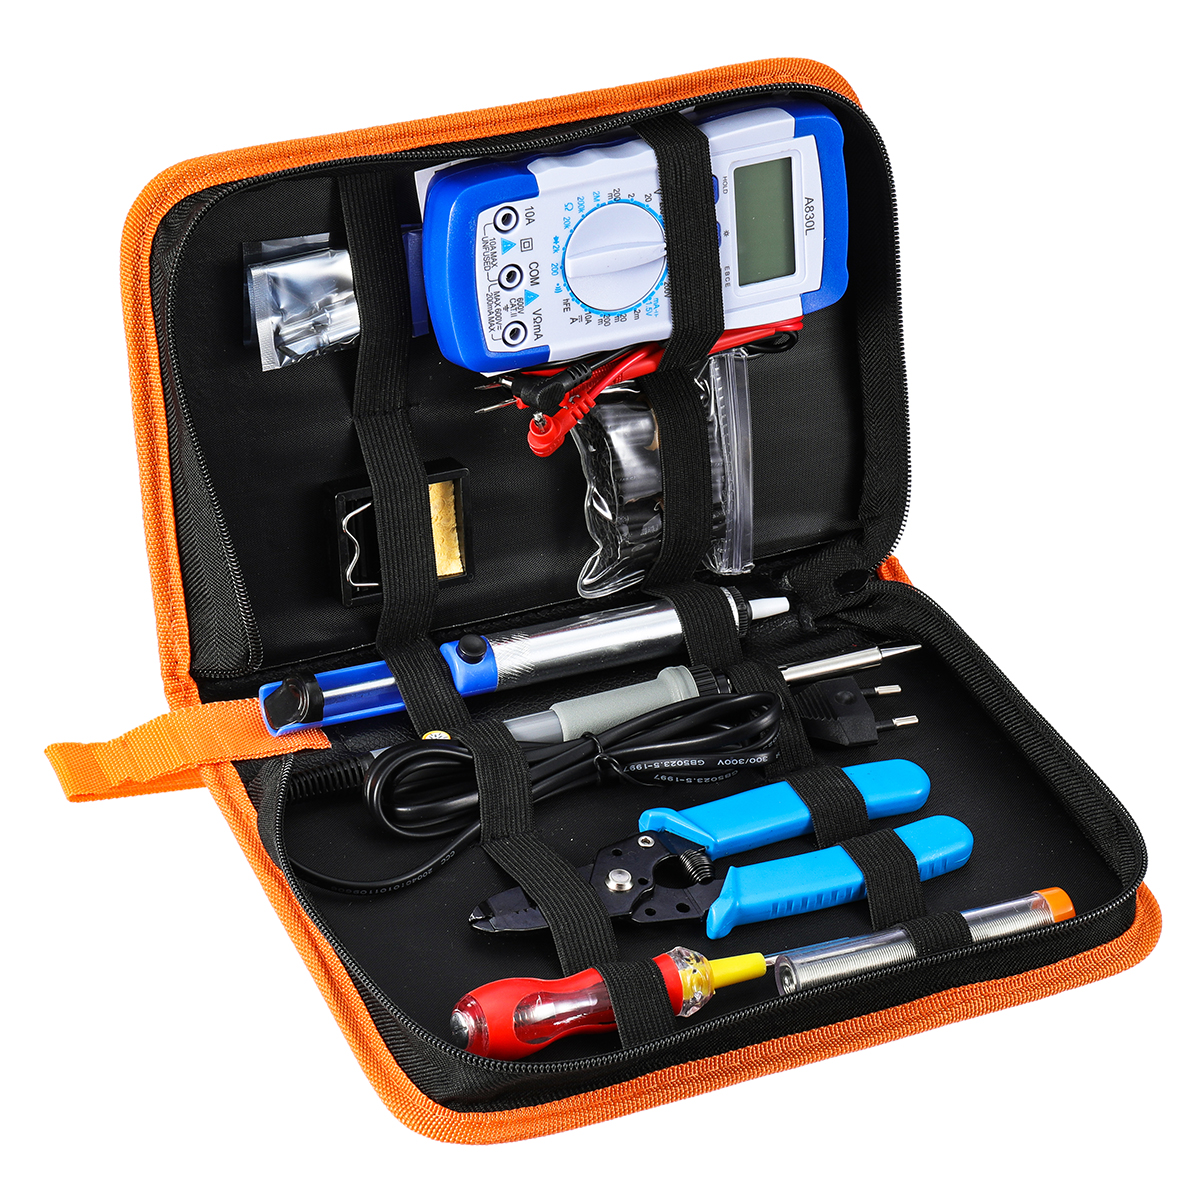 60W-Soldering-Iron-Kit-Tips-Electronic-Welding-Tool-Adjustable-Temperature-Case-1407153-10